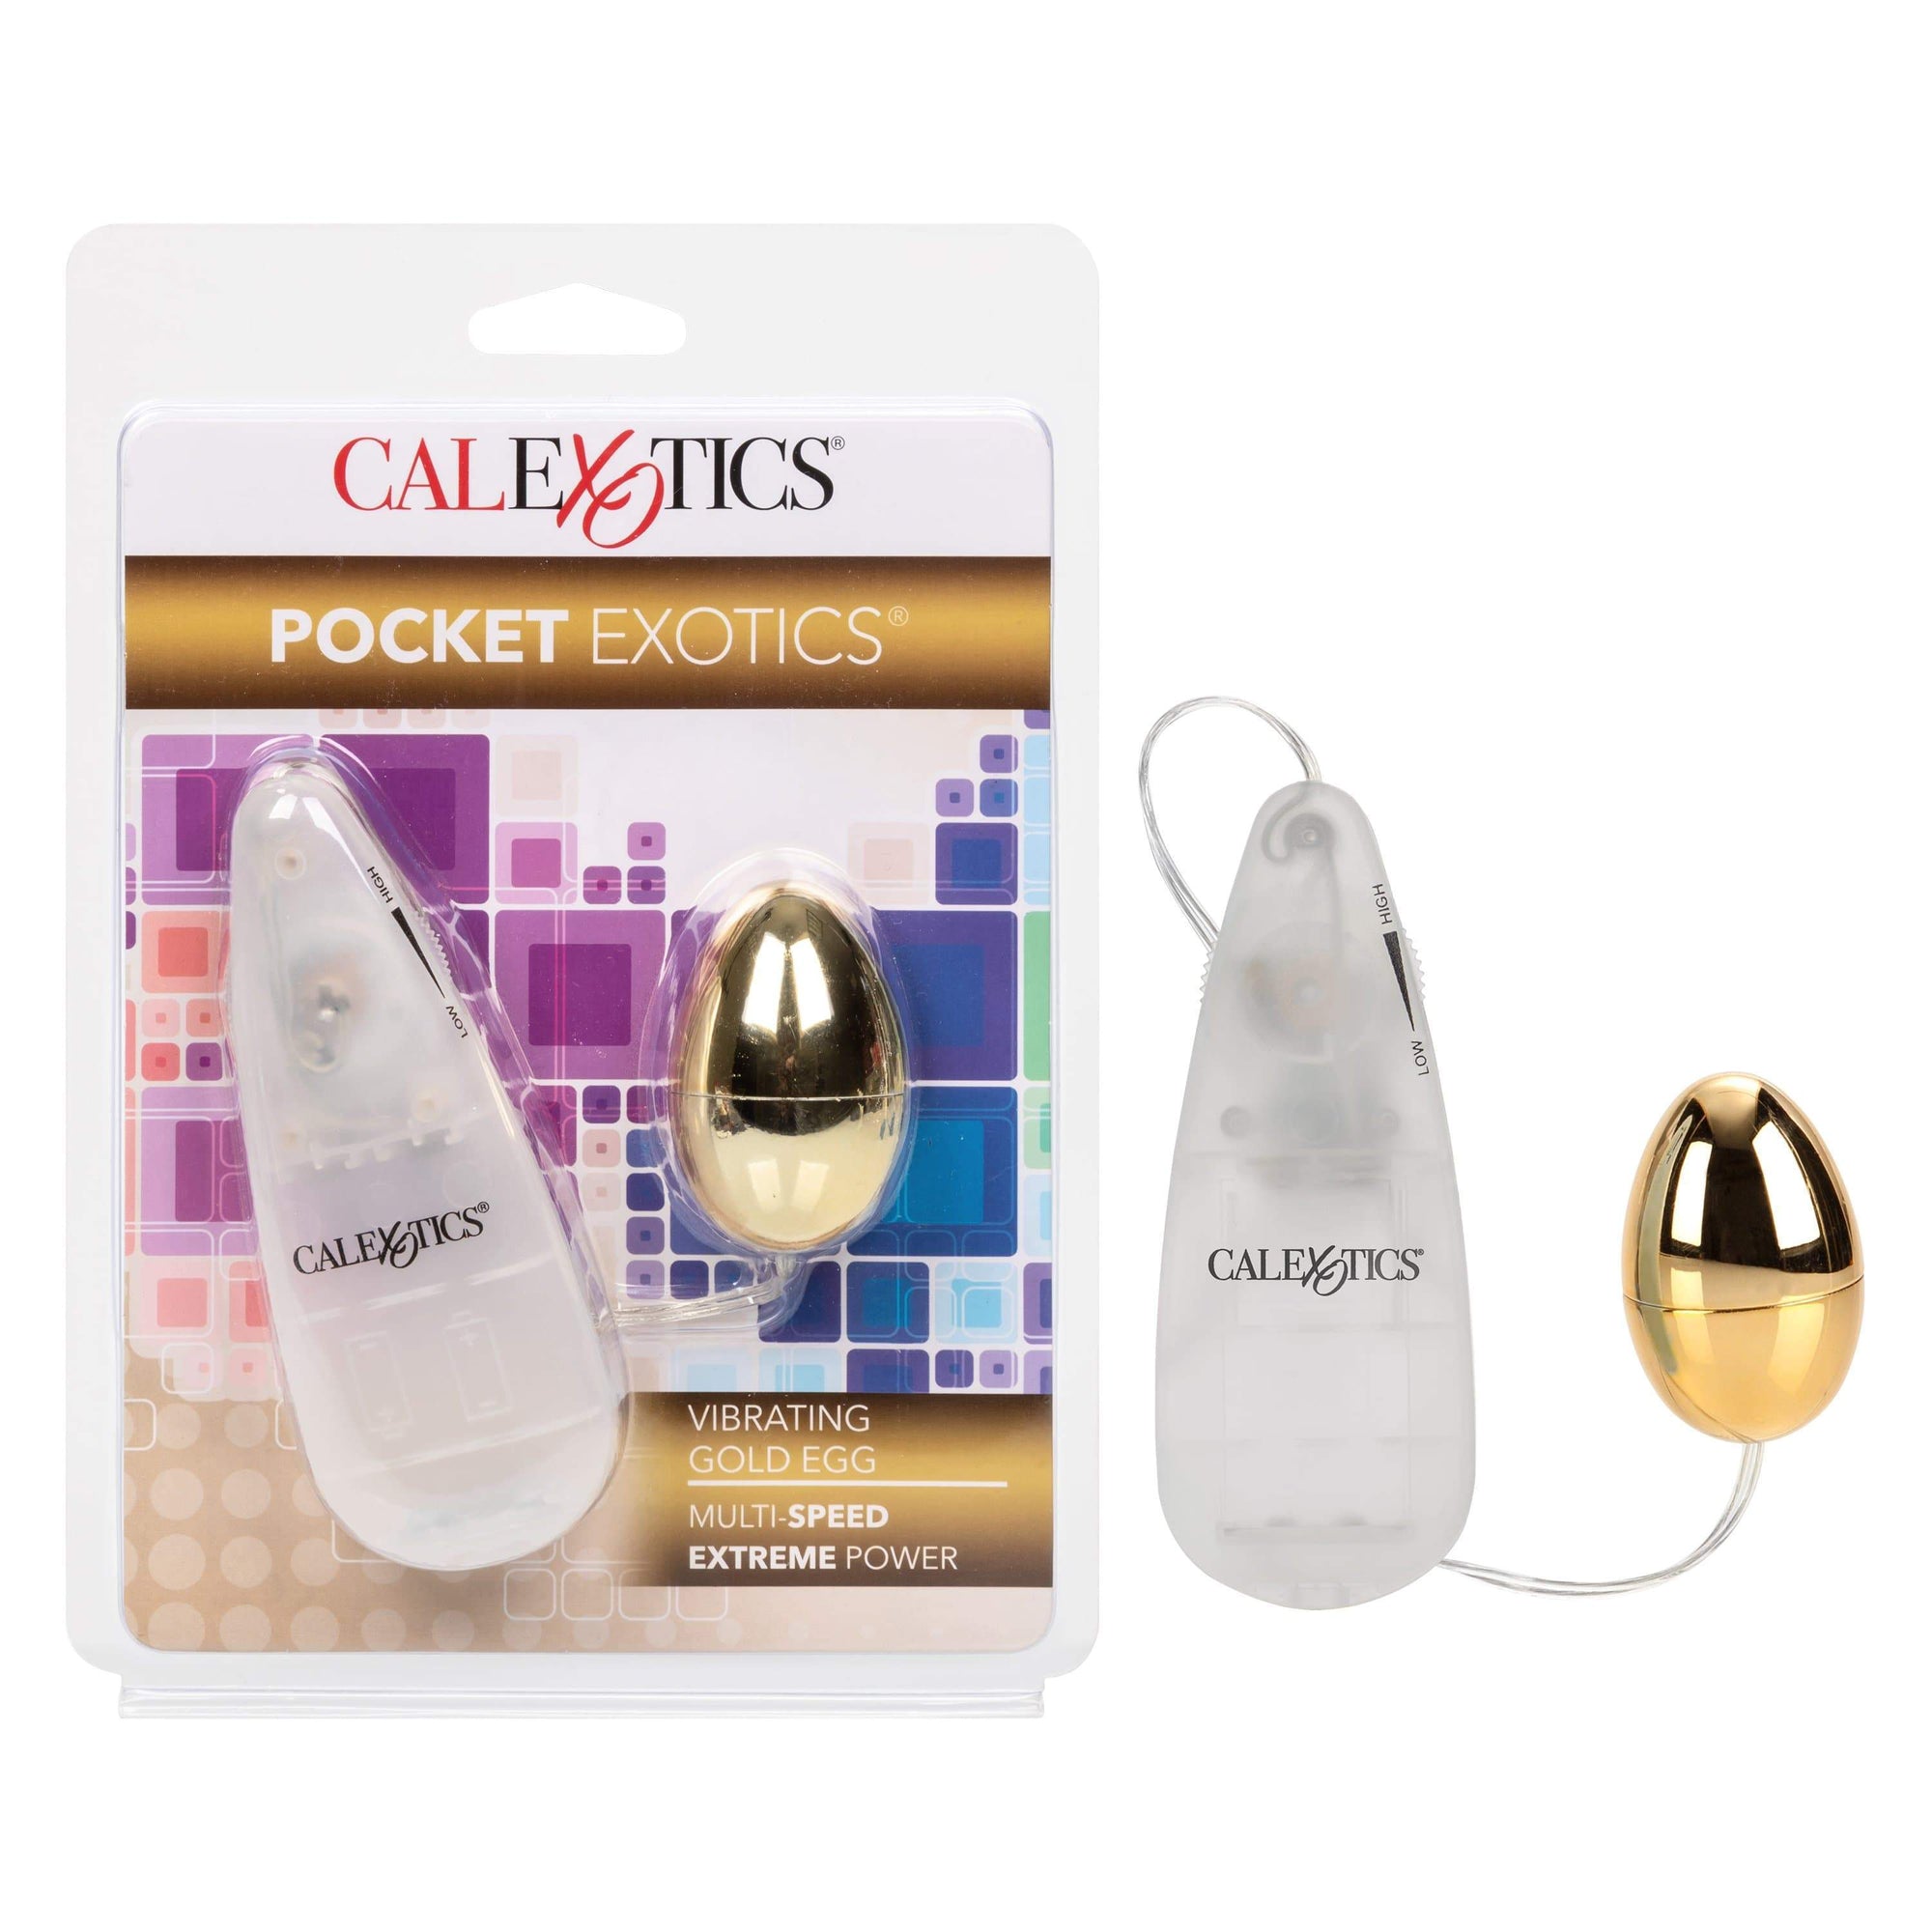 California Exotics - Pocket Exotics Vibrating Gold Egg Massager with Remote (Gold) Wired Remote Control Egg (Vibration) Non Rechargeable Durio Asia